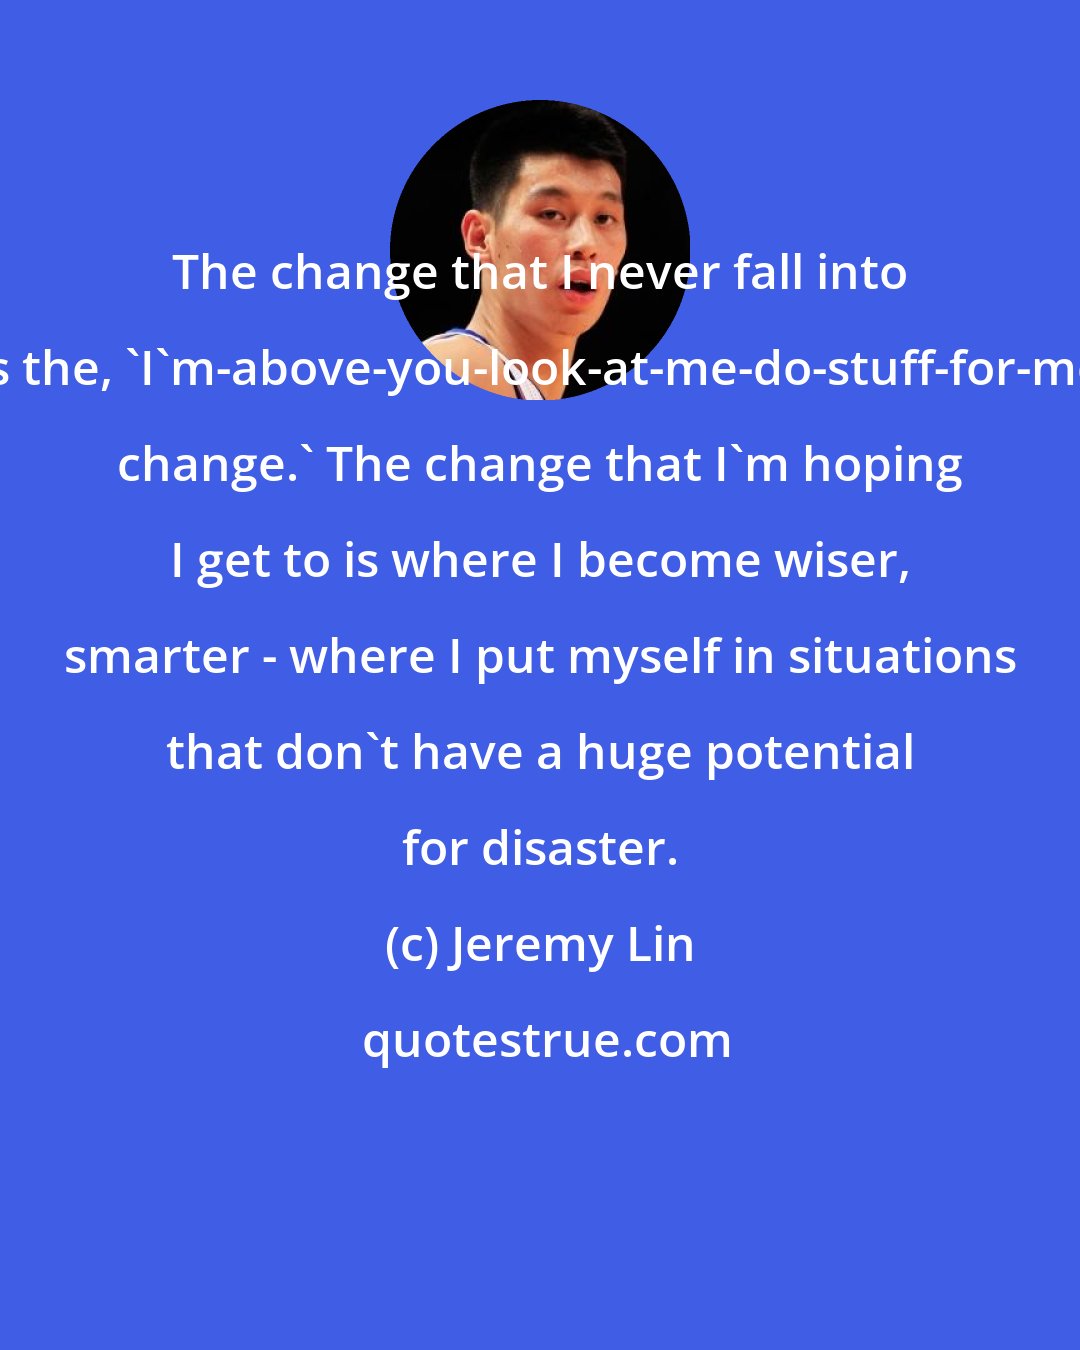 Jeremy Lin: The change that I never fall into is the, 'I'm-above-you-look-at-me-do-stuff-for-me change.' The change that I'm hoping I get to is where I become wiser, smarter - where I put myself in situations that don't have a huge potential for disaster.